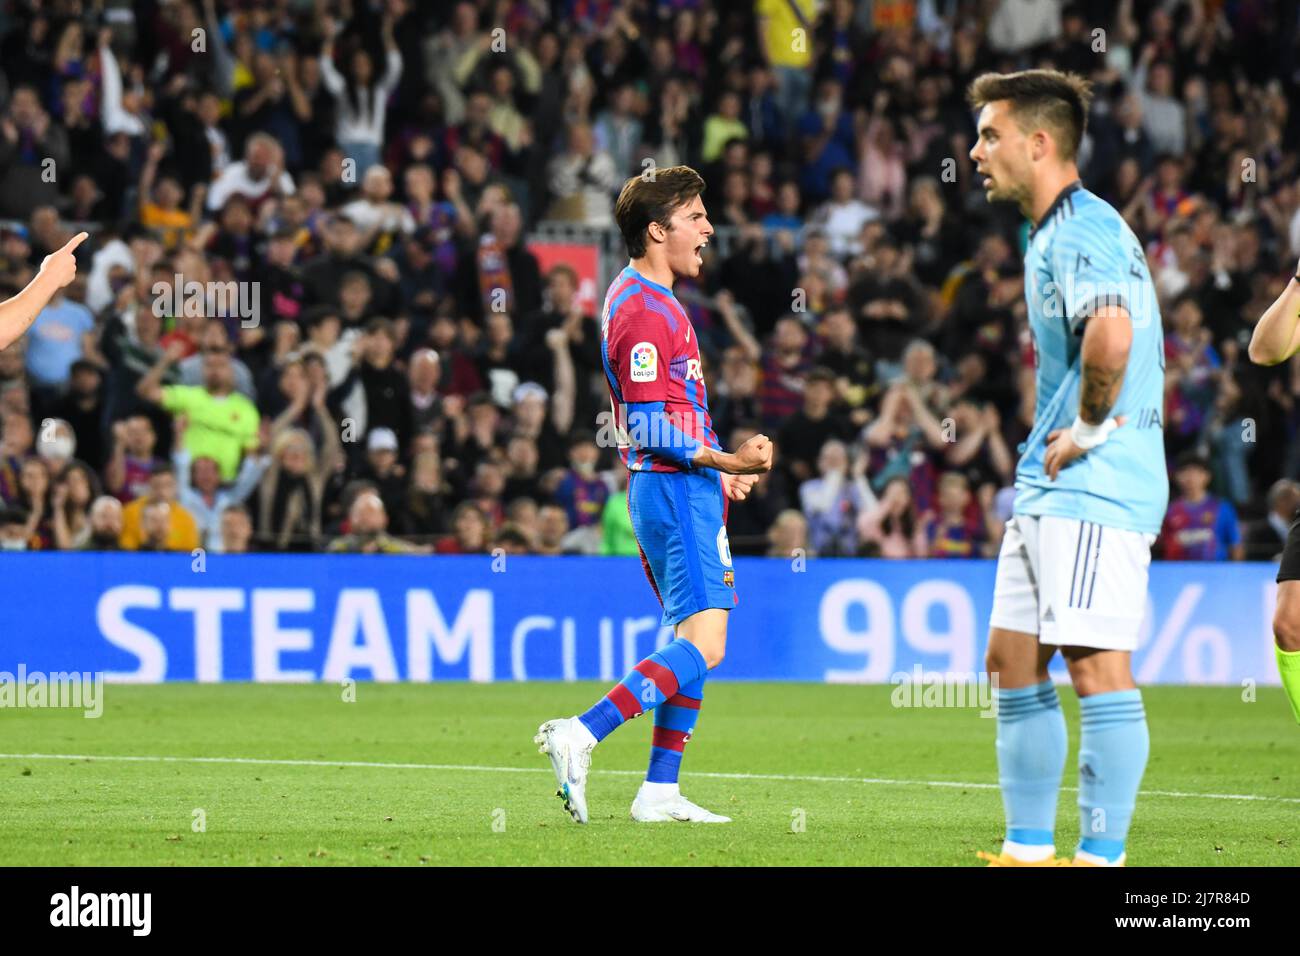 BARCELONA, SPAIN - MAY 10: Riqui Puig of FC Barcelona celebrates after his team scoring a goal during La Liga match between FC Barcelona and RC Celta de Vigo at Camp Nou on May 10, 2022 in Barcelona, SPAIN. (Photo by Sara Aribo/PxImages) Stock Photo